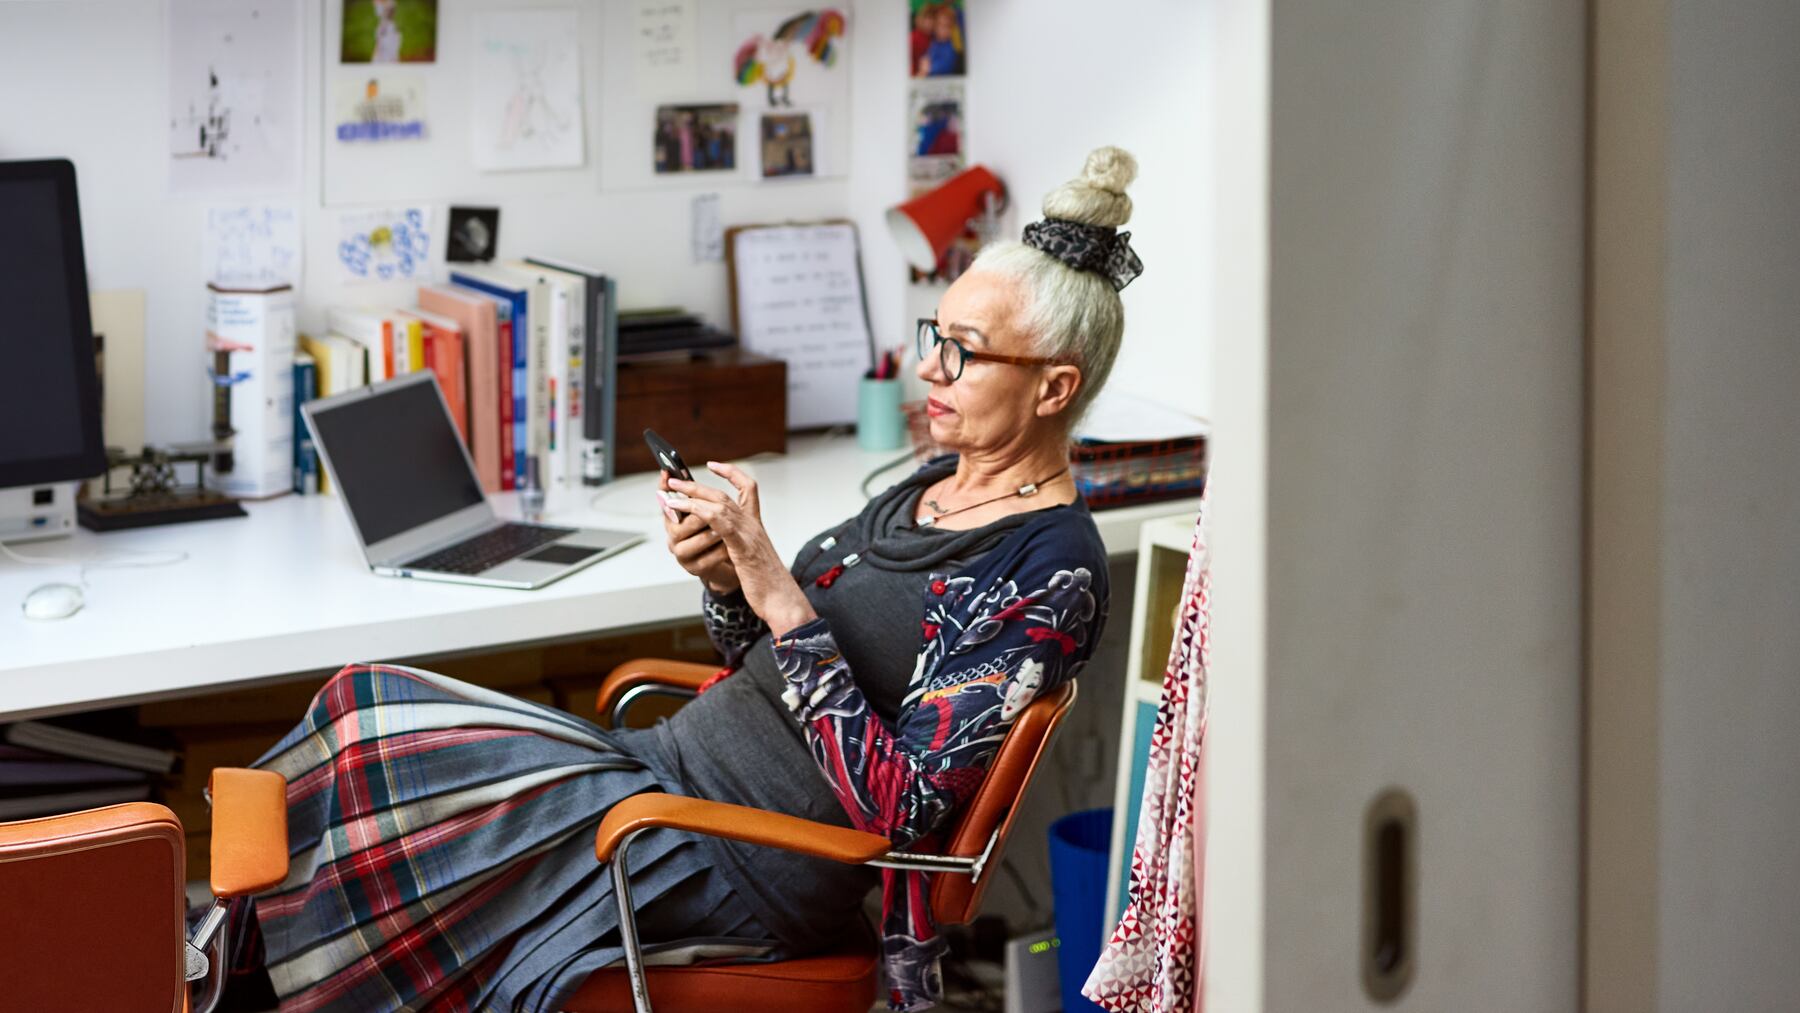 For thousands of companies across the fashion industry making the right call between remote work, in-person or a mix of both has been a daunting task. But a promising national vaccine rollout and a push for a return to normal life means most leaders must make a decision now. Getty Images.